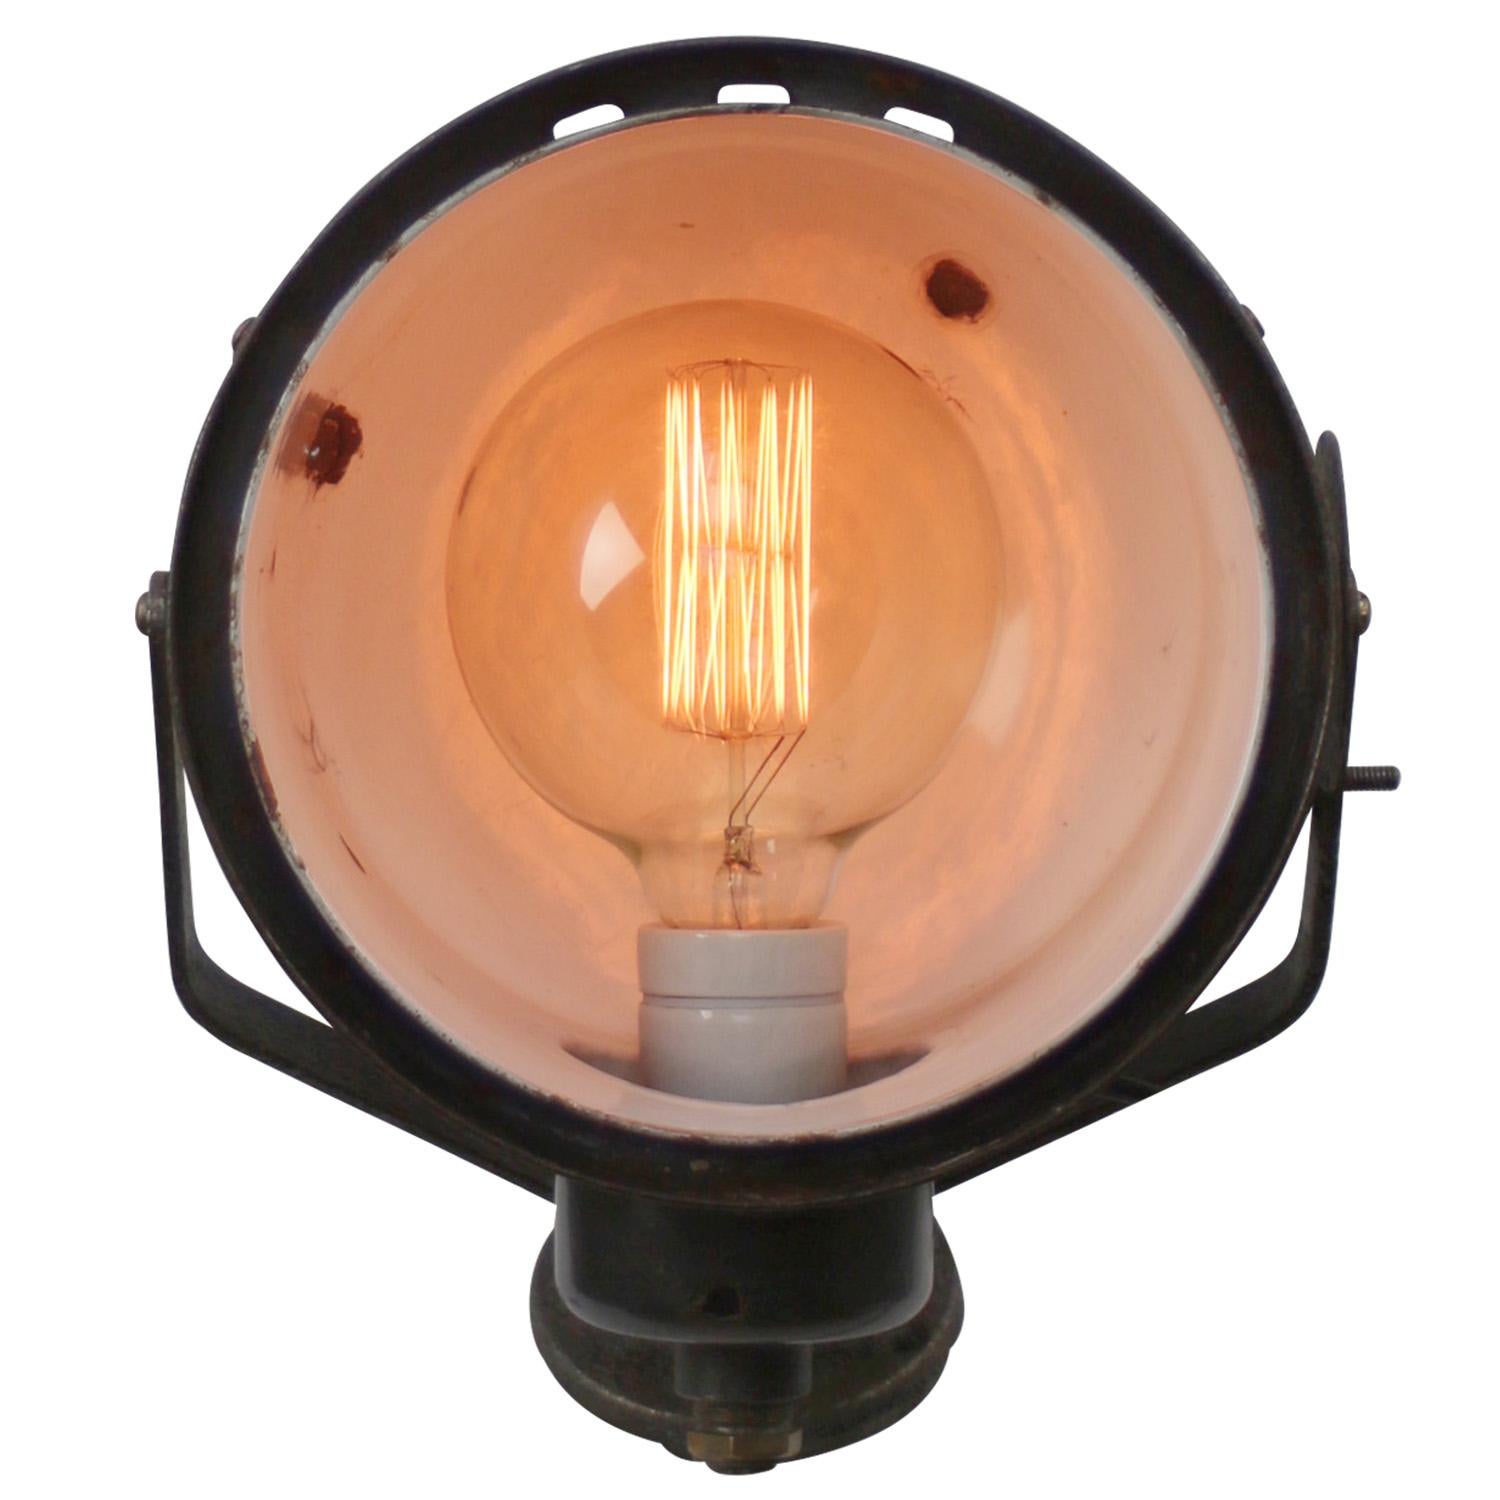 Adjustable industrial wall light
Black enamel, cast iron parts and wall piece

Measure: diameter wall mount 10.5 cm / 4”

Weight: 3.00 kg / 6.6 lb

Priced per individual item. All lamps have been made suitable by international standards for